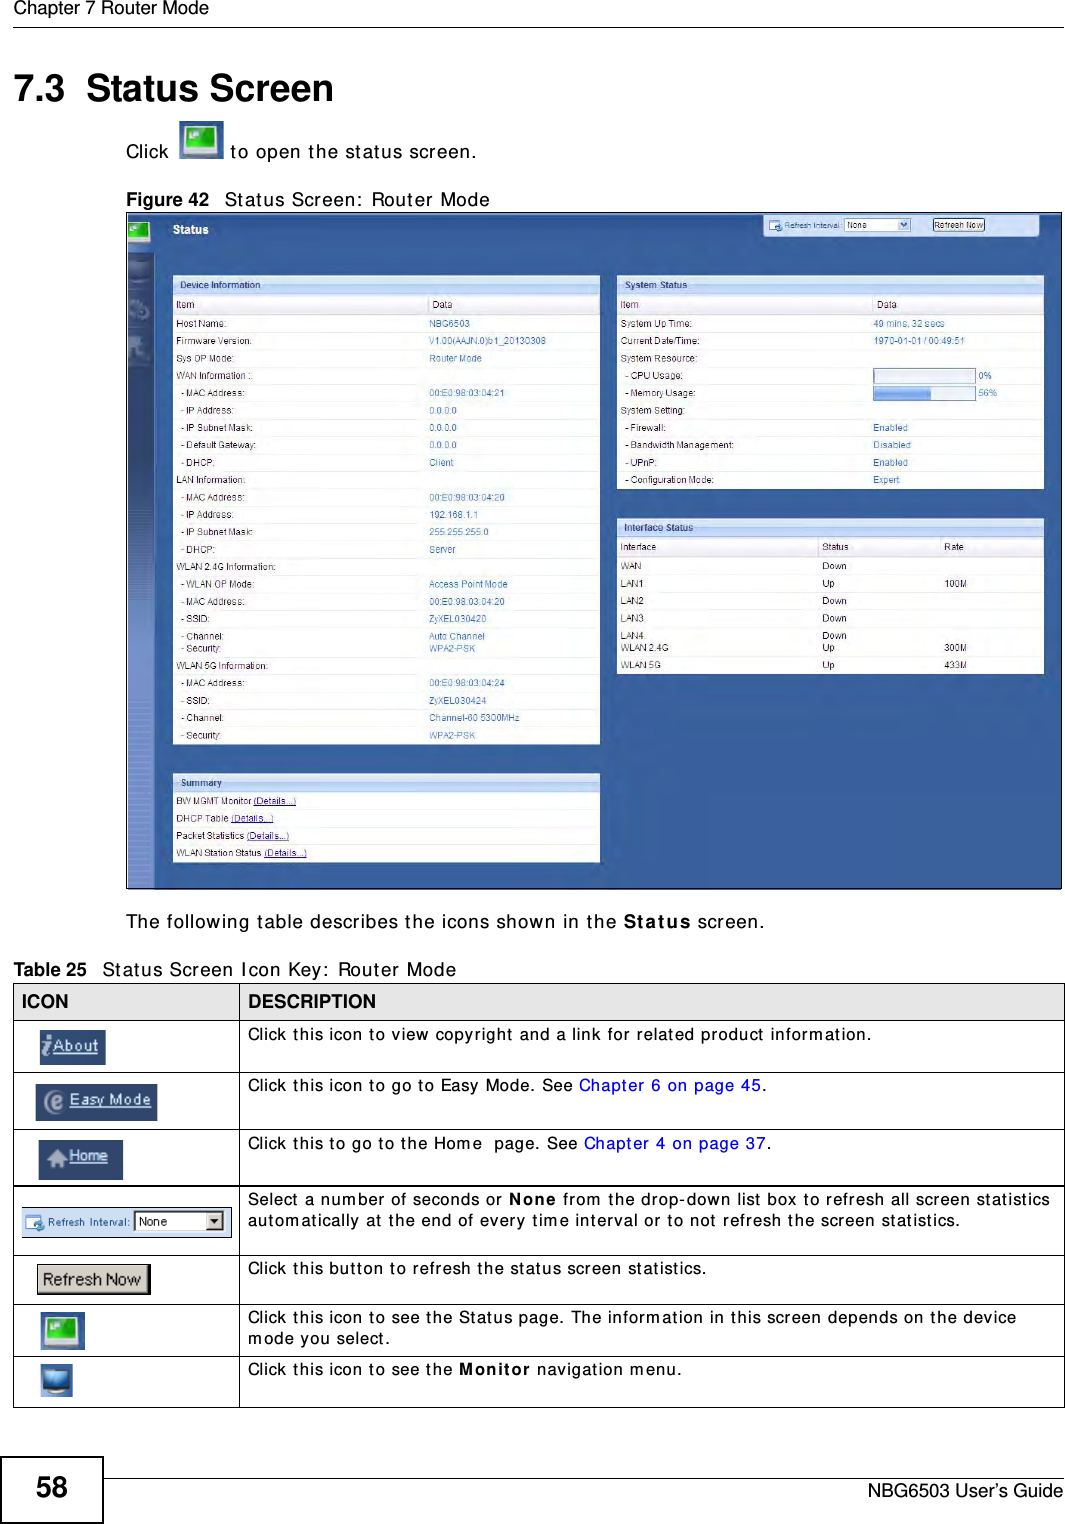 Chapter 7 Router ModeNBG6503 User’s Guide587.3  Status ScreenClick  to open the status screen. Figure 42   Status Screen: Router Mode The following table describes the icons shown in the Status screen.Table 25   Status Screen Icon Key: Router Mode ICON DESCRIPTIONClick this icon to view copyright and a link for related product information.Click this icon to go to Easy Mode. See Chapter 6 on page 45.Click this to go to the Home  page. See Chapter 4 on page 37.Select a number of seconds or None from the drop-down list box to refresh all screen statistics automatically at the end of every time interval or to not refresh the screen statistics.Click this button to refresh the status screen statistics.Click this icon to see the Status page. The information in this screen depends on the device mode you select. Click this icon to see the Monitor navigation menu. 